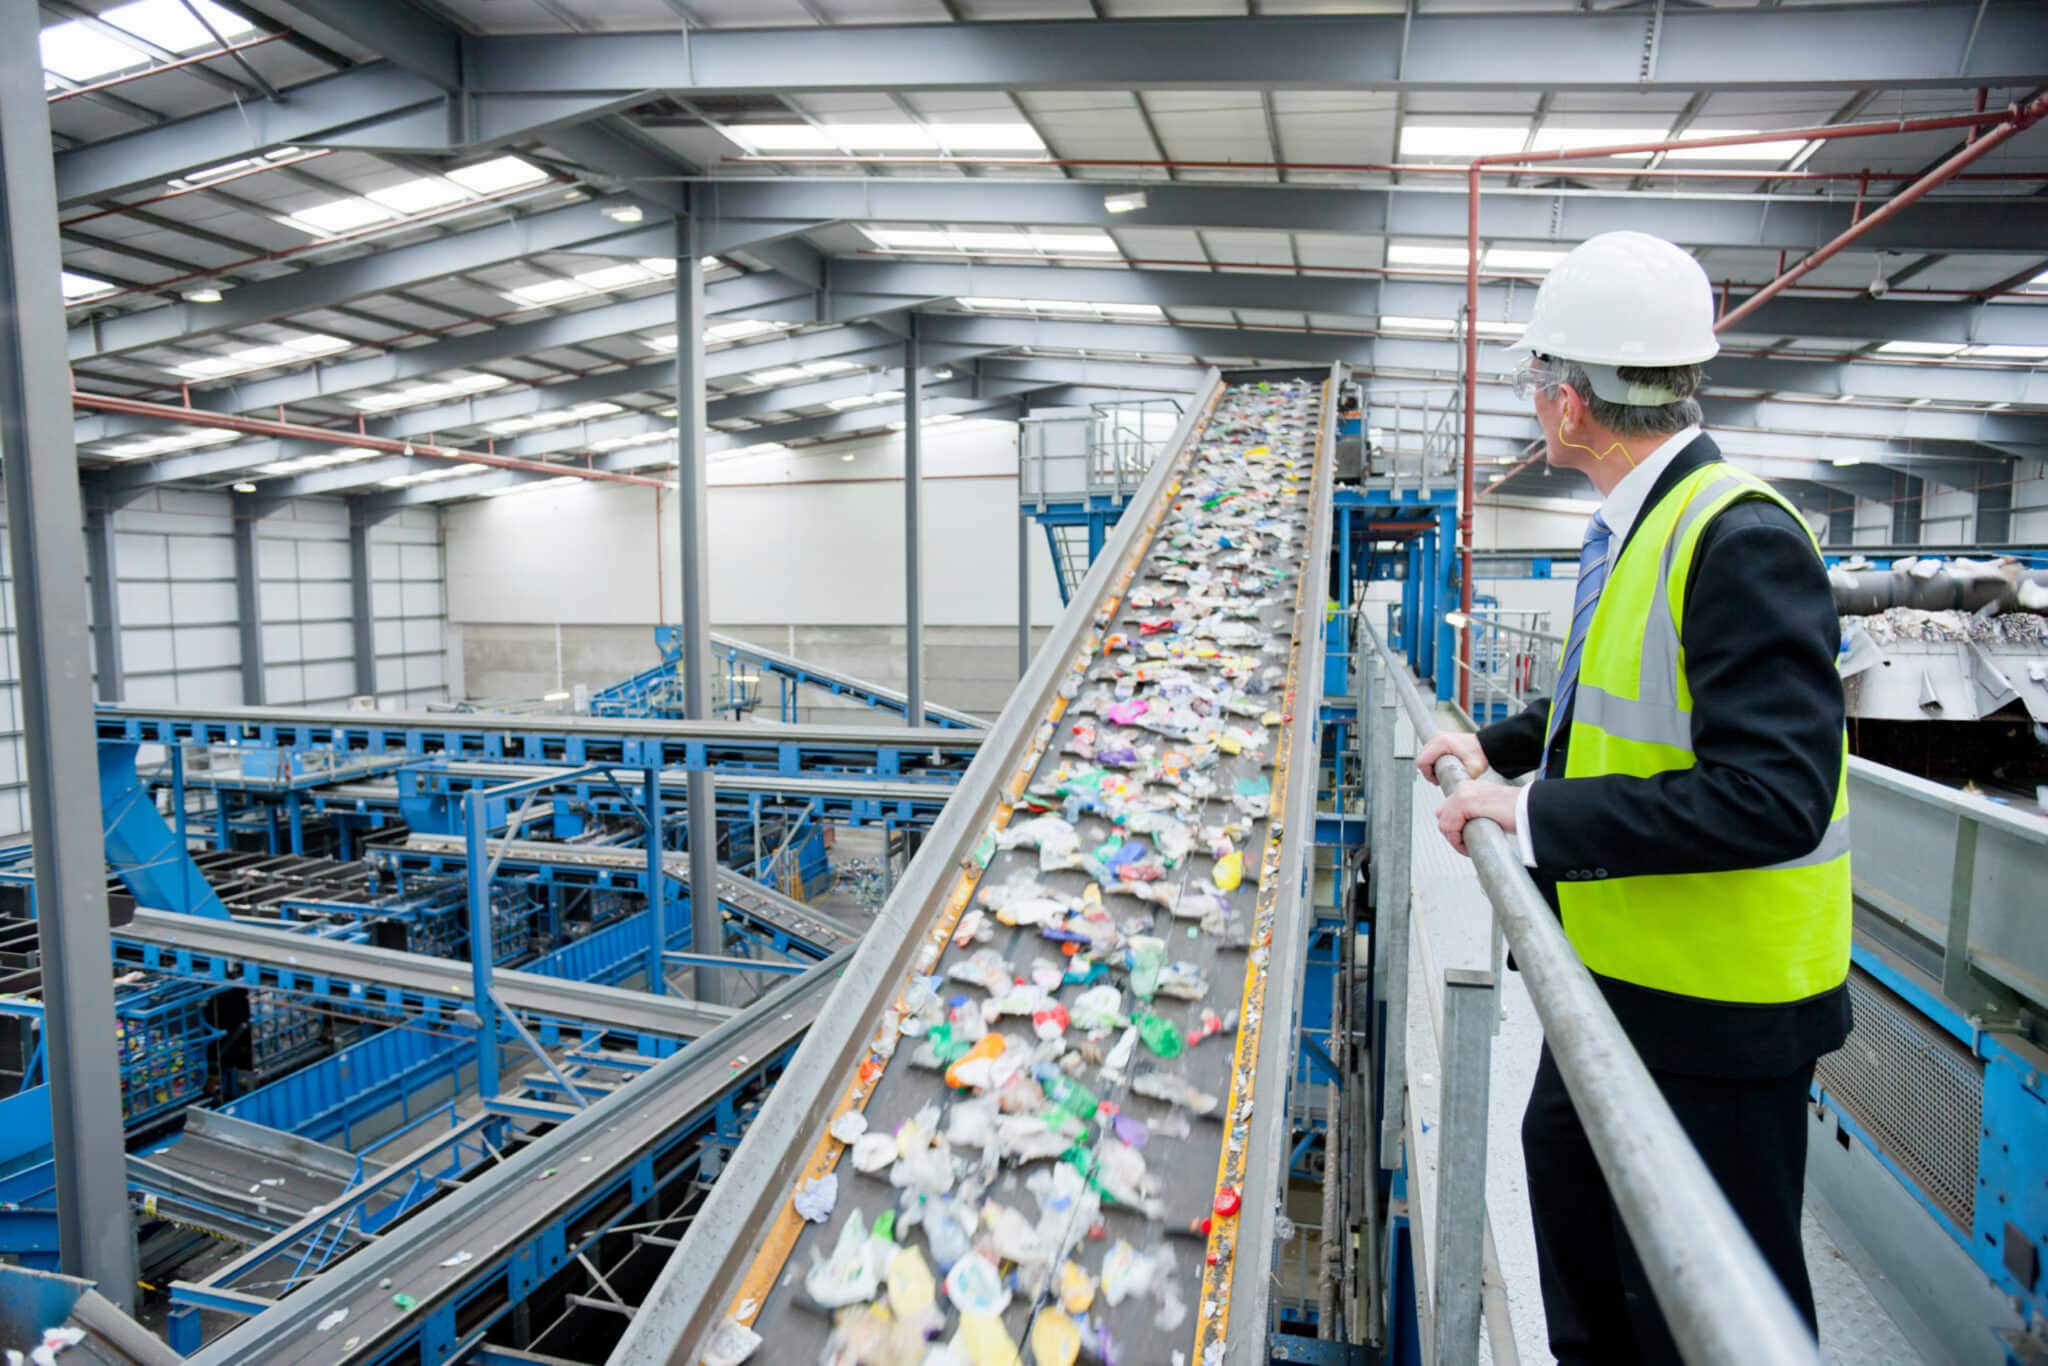 How to Start a Recycling Business - Facility & Equipment